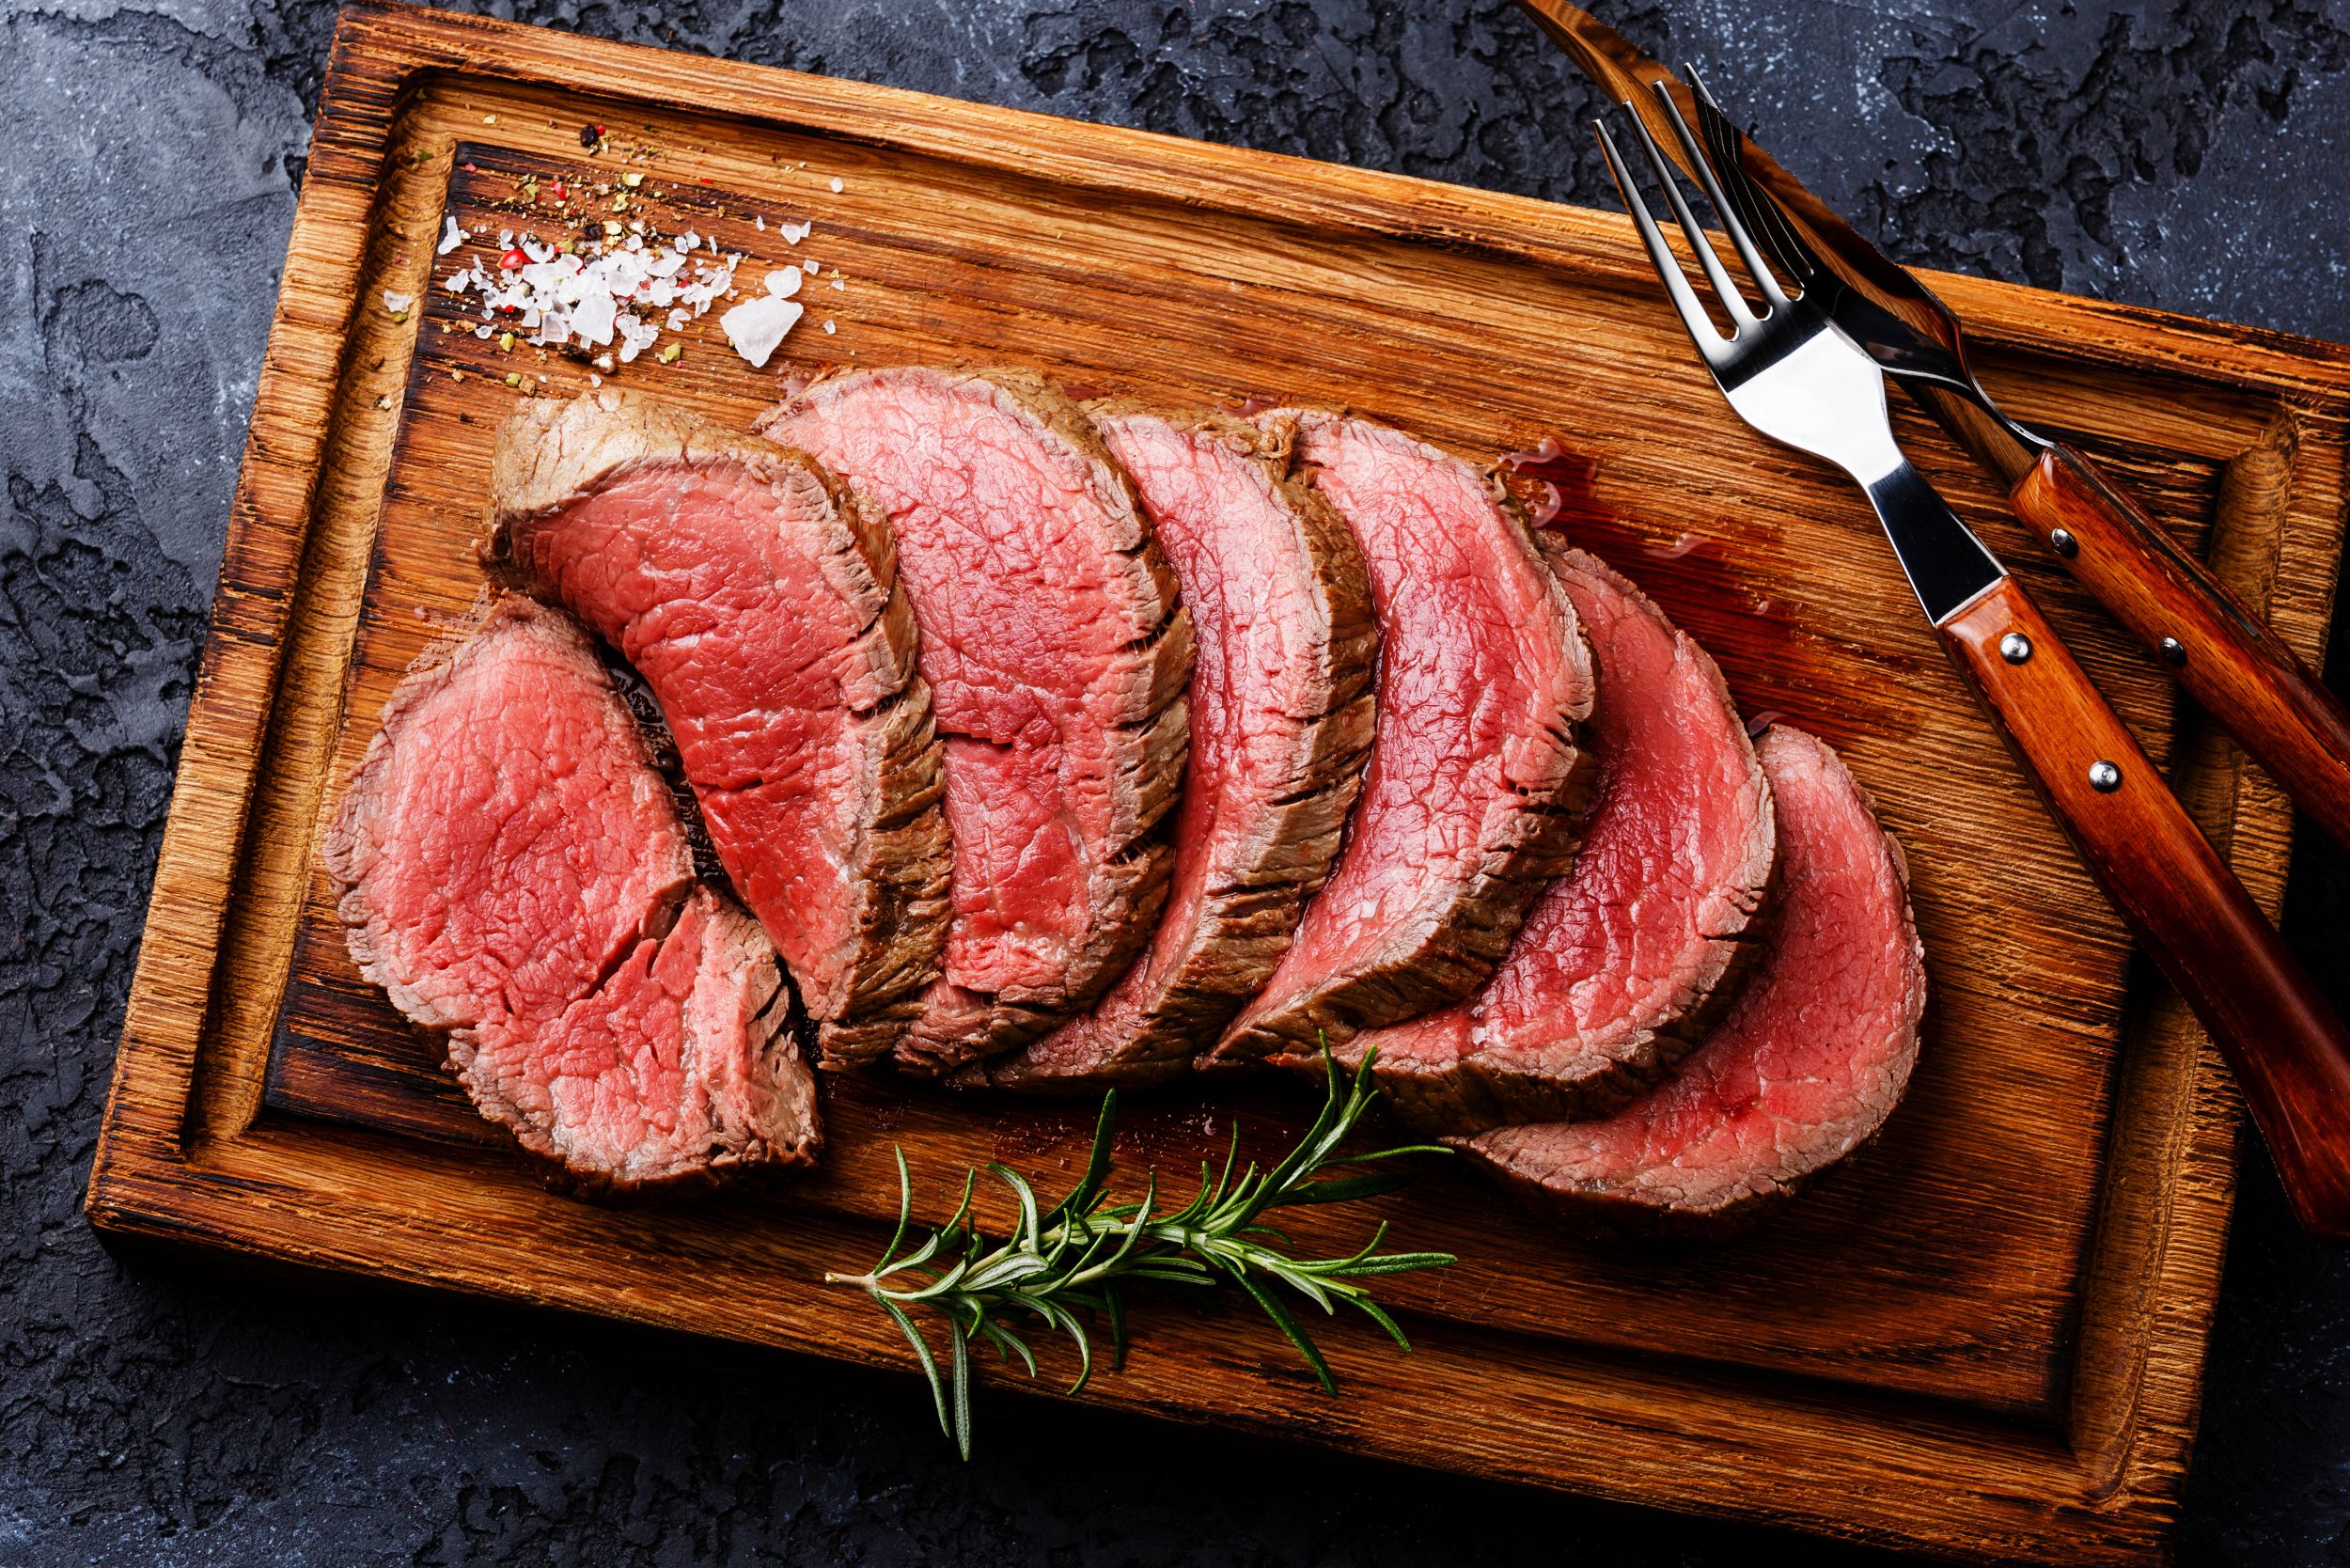 Chateaubriand: Cut of Beef or Method of Preparation?